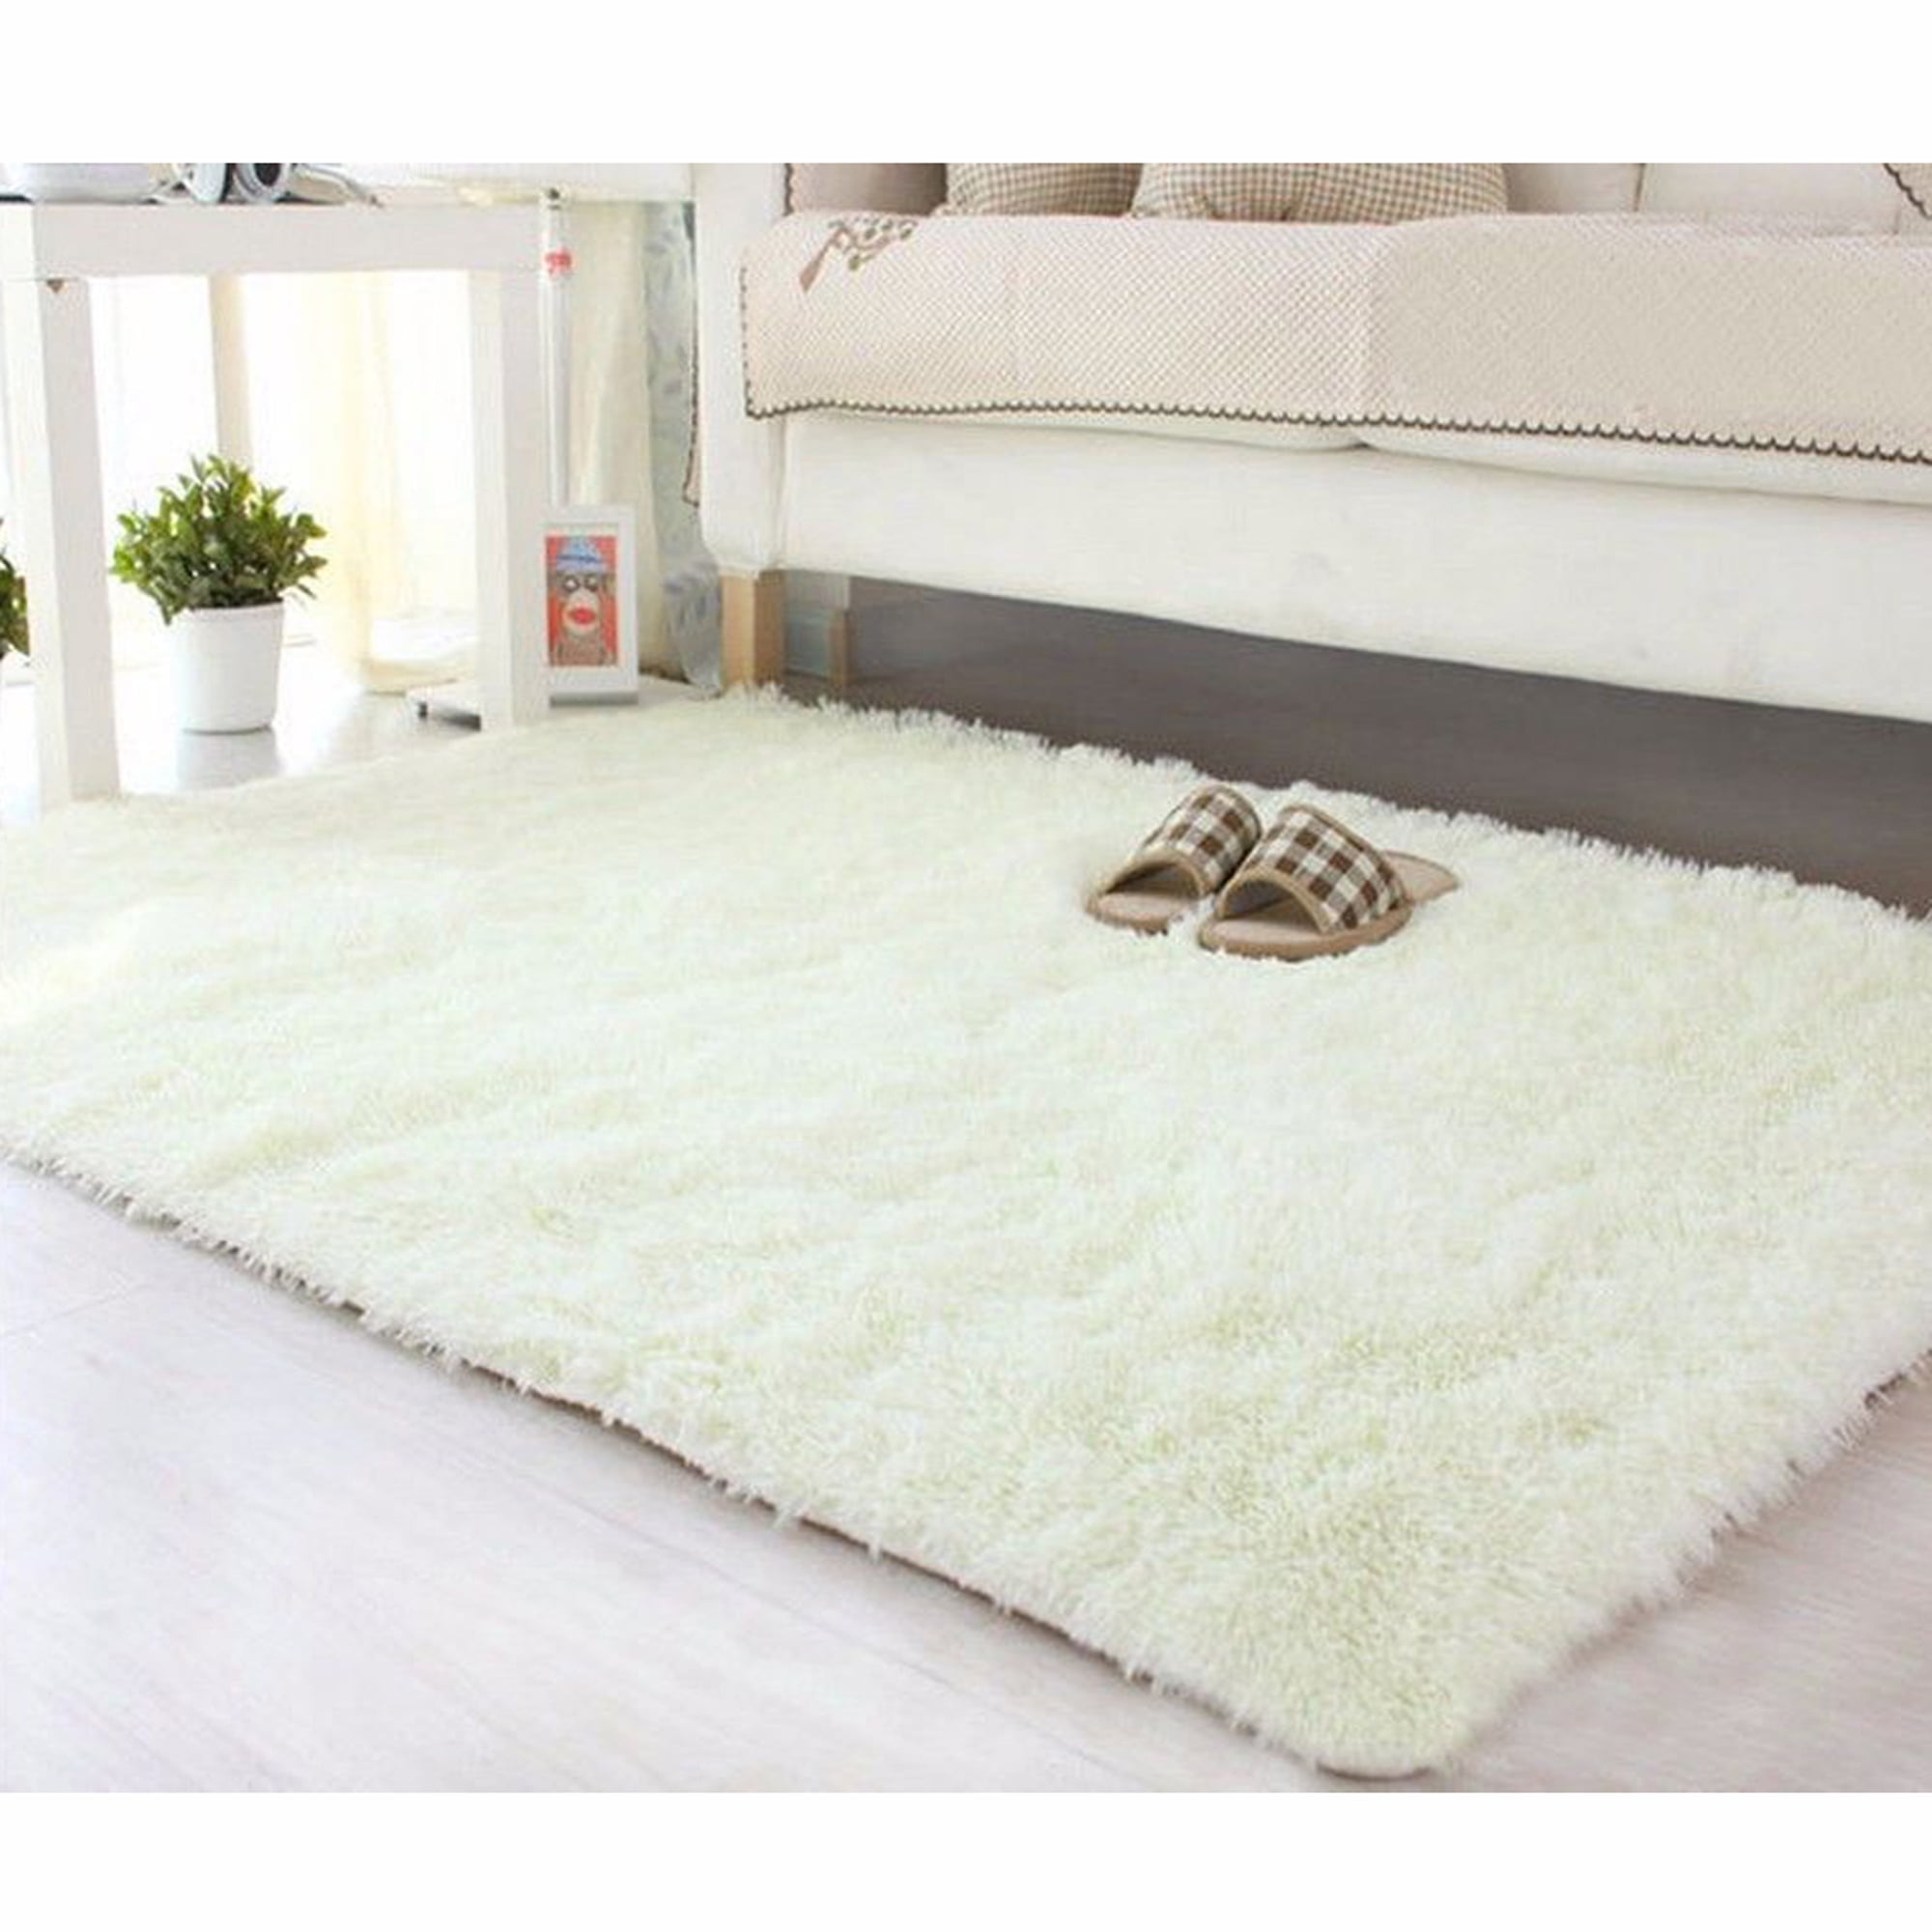 Dropship 1pc Soft Plush Shaggy Area Rugs, Fluffy Bubble Velvet Floor Carpet  For Bedroom Living Room, Bedside Rugs, Non-Slip Washable Carpet, to Sell  Online at a Lower Price